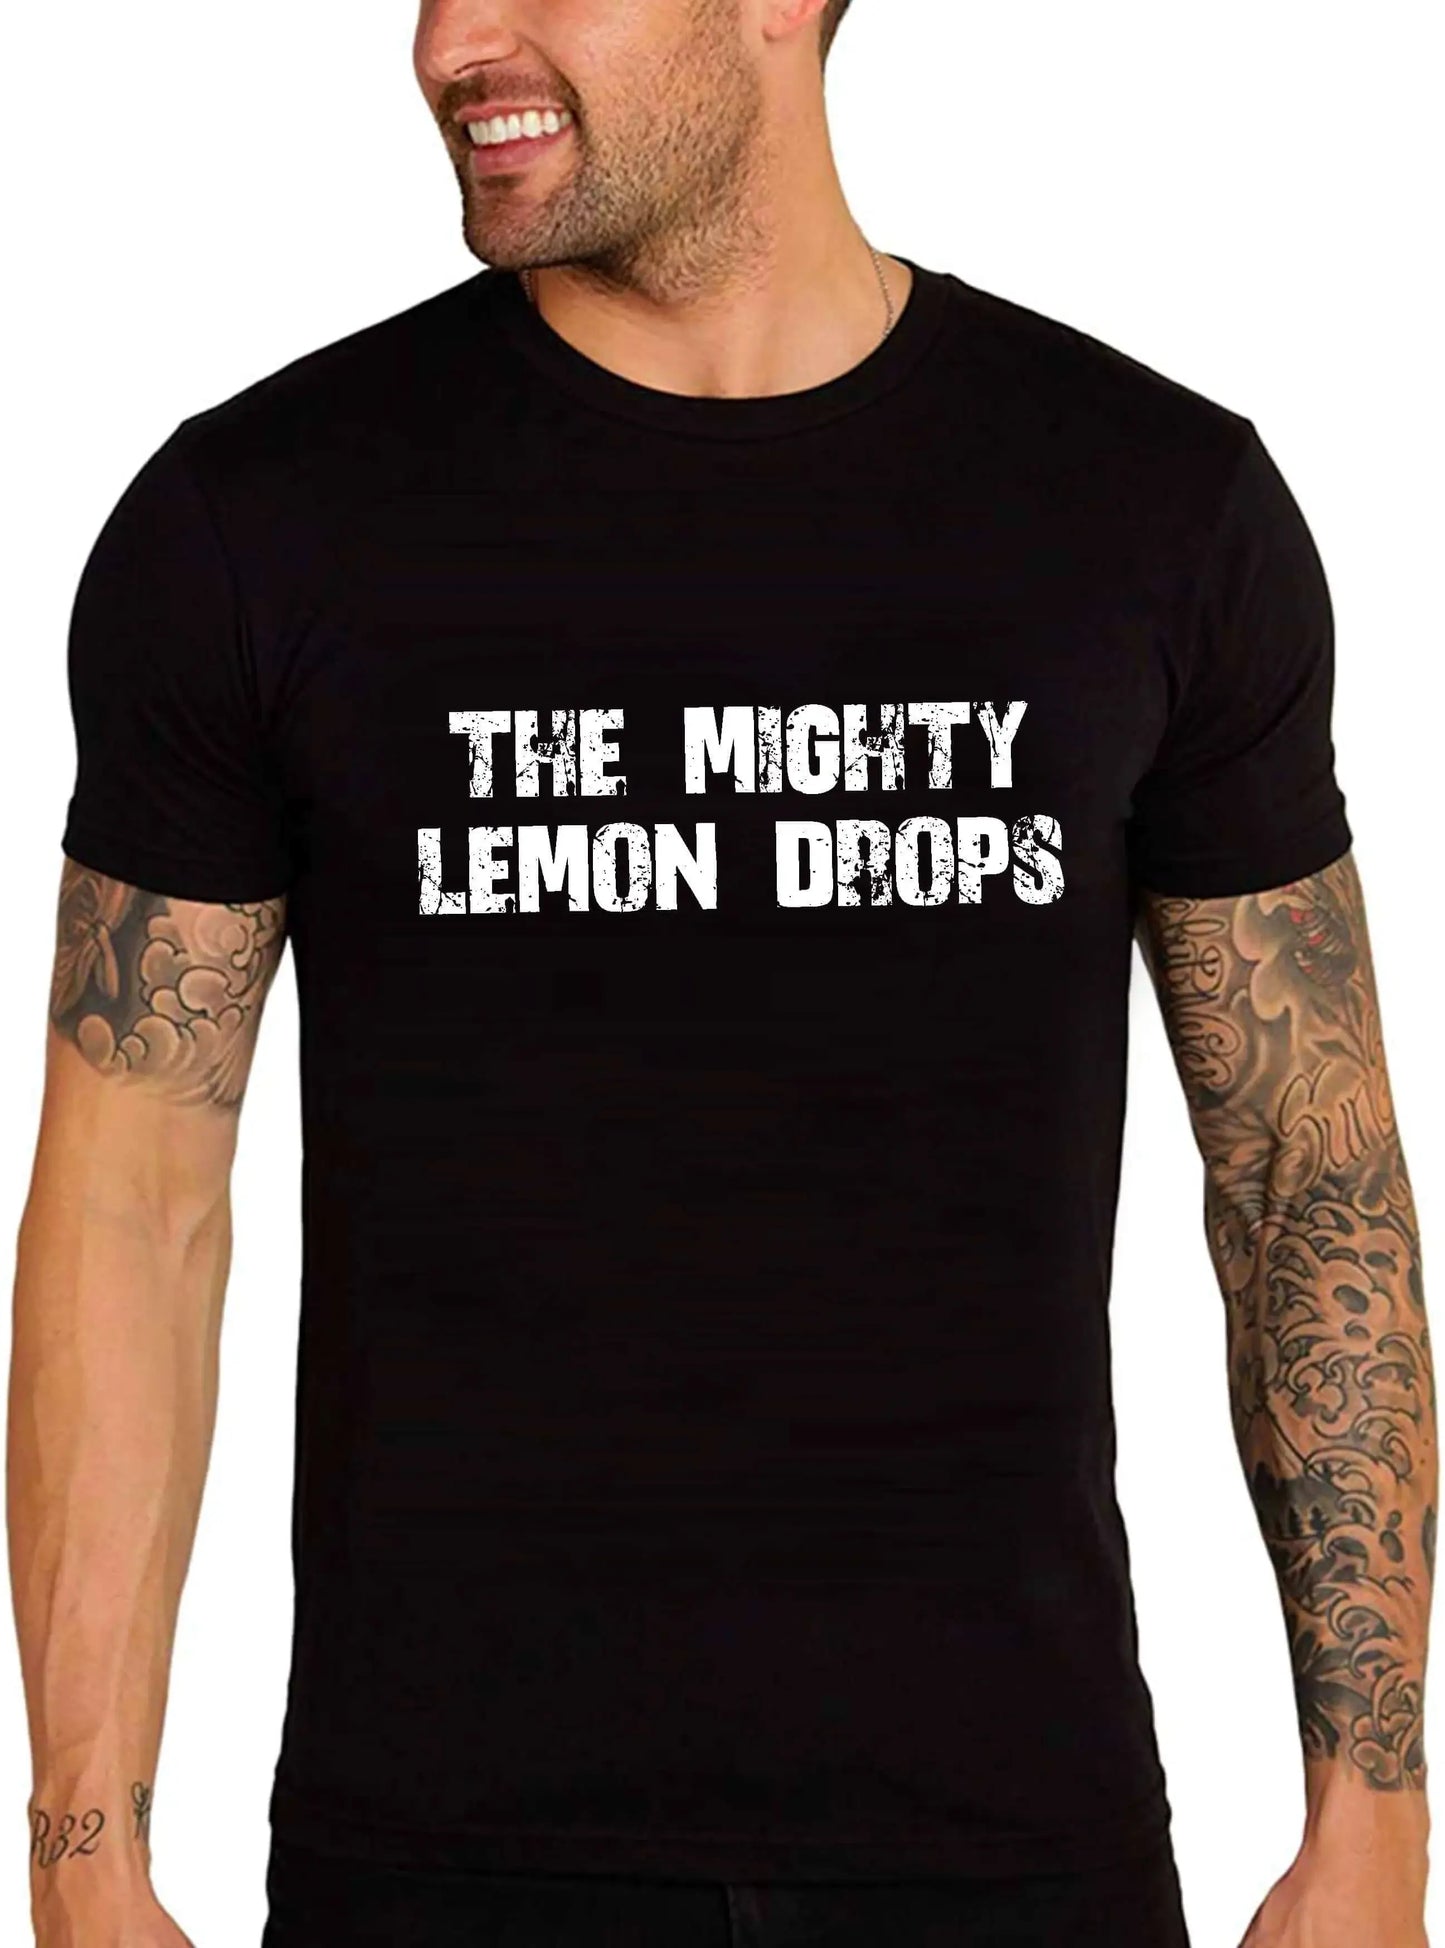 Men's Graphic T-Shirt The Mighty Lemon Drops Eco-Friendly Limited Edition Short Sleeve Tee-Shirt Vintage Birthday Gift Novelty